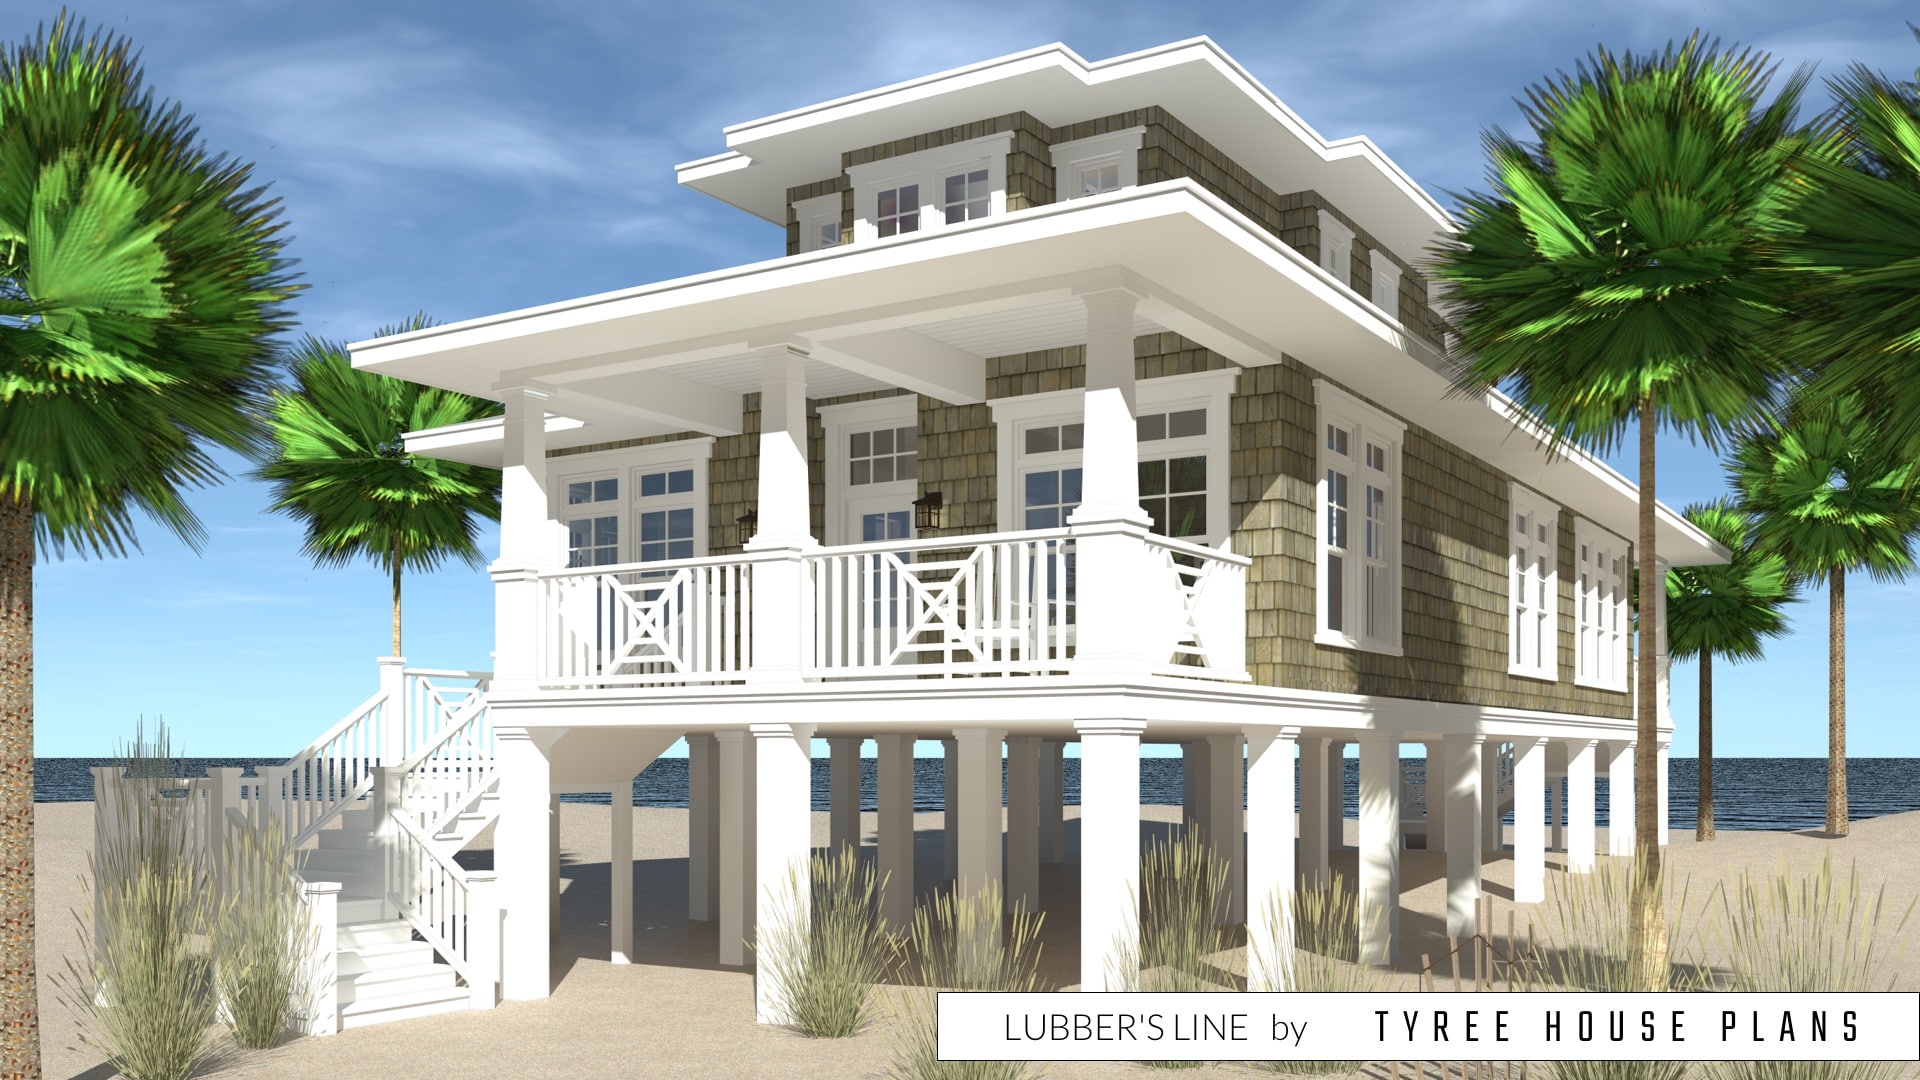 Lubber's Line House Plan by Tyree House Plans